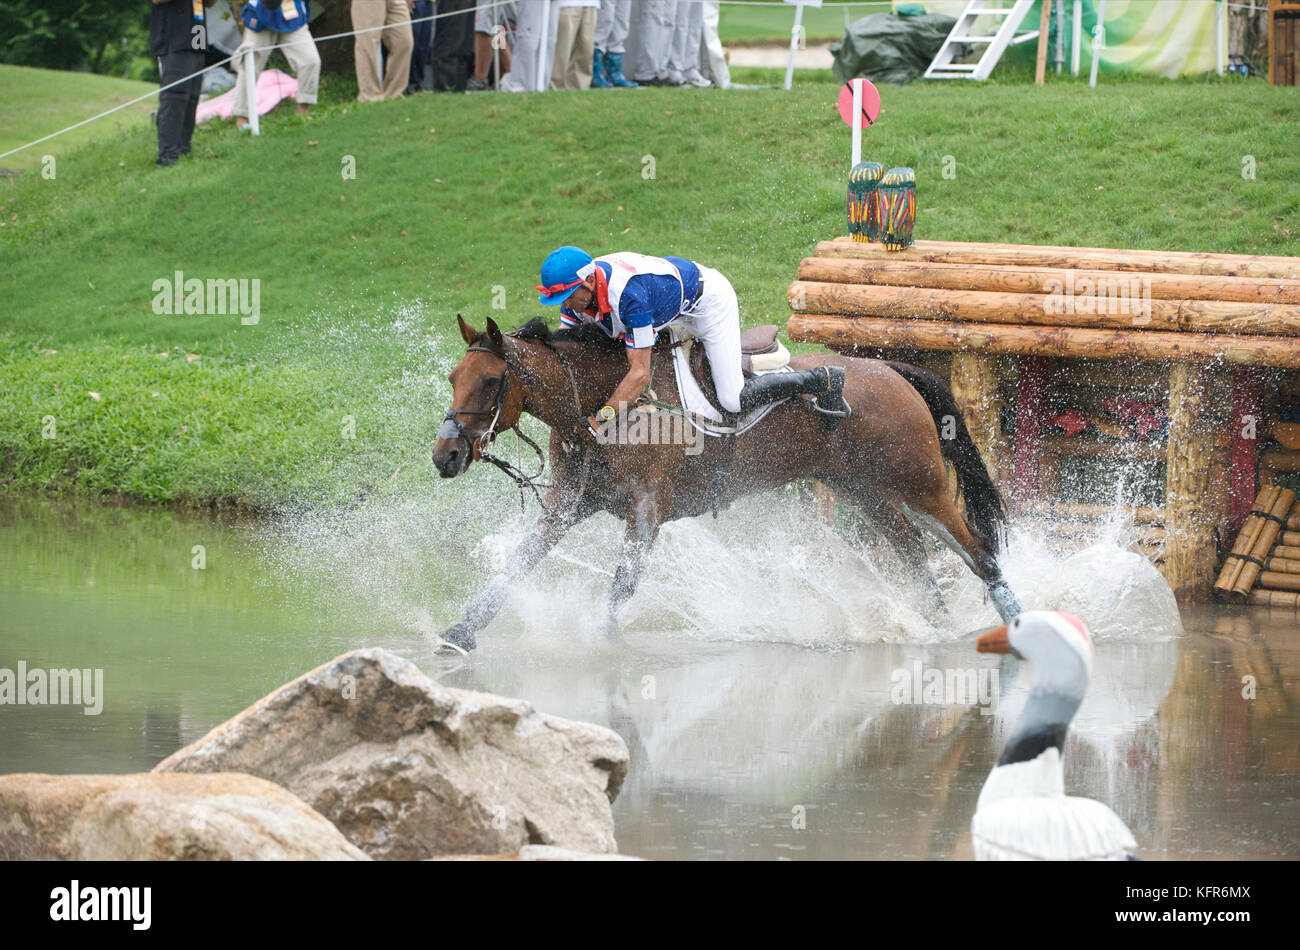 Olympic Games 2008, Hong Kong (Beijing Games) August 2008, Didier Dhennin (FRA) riding Ismene du Temple, eventing cross country Stock Photo